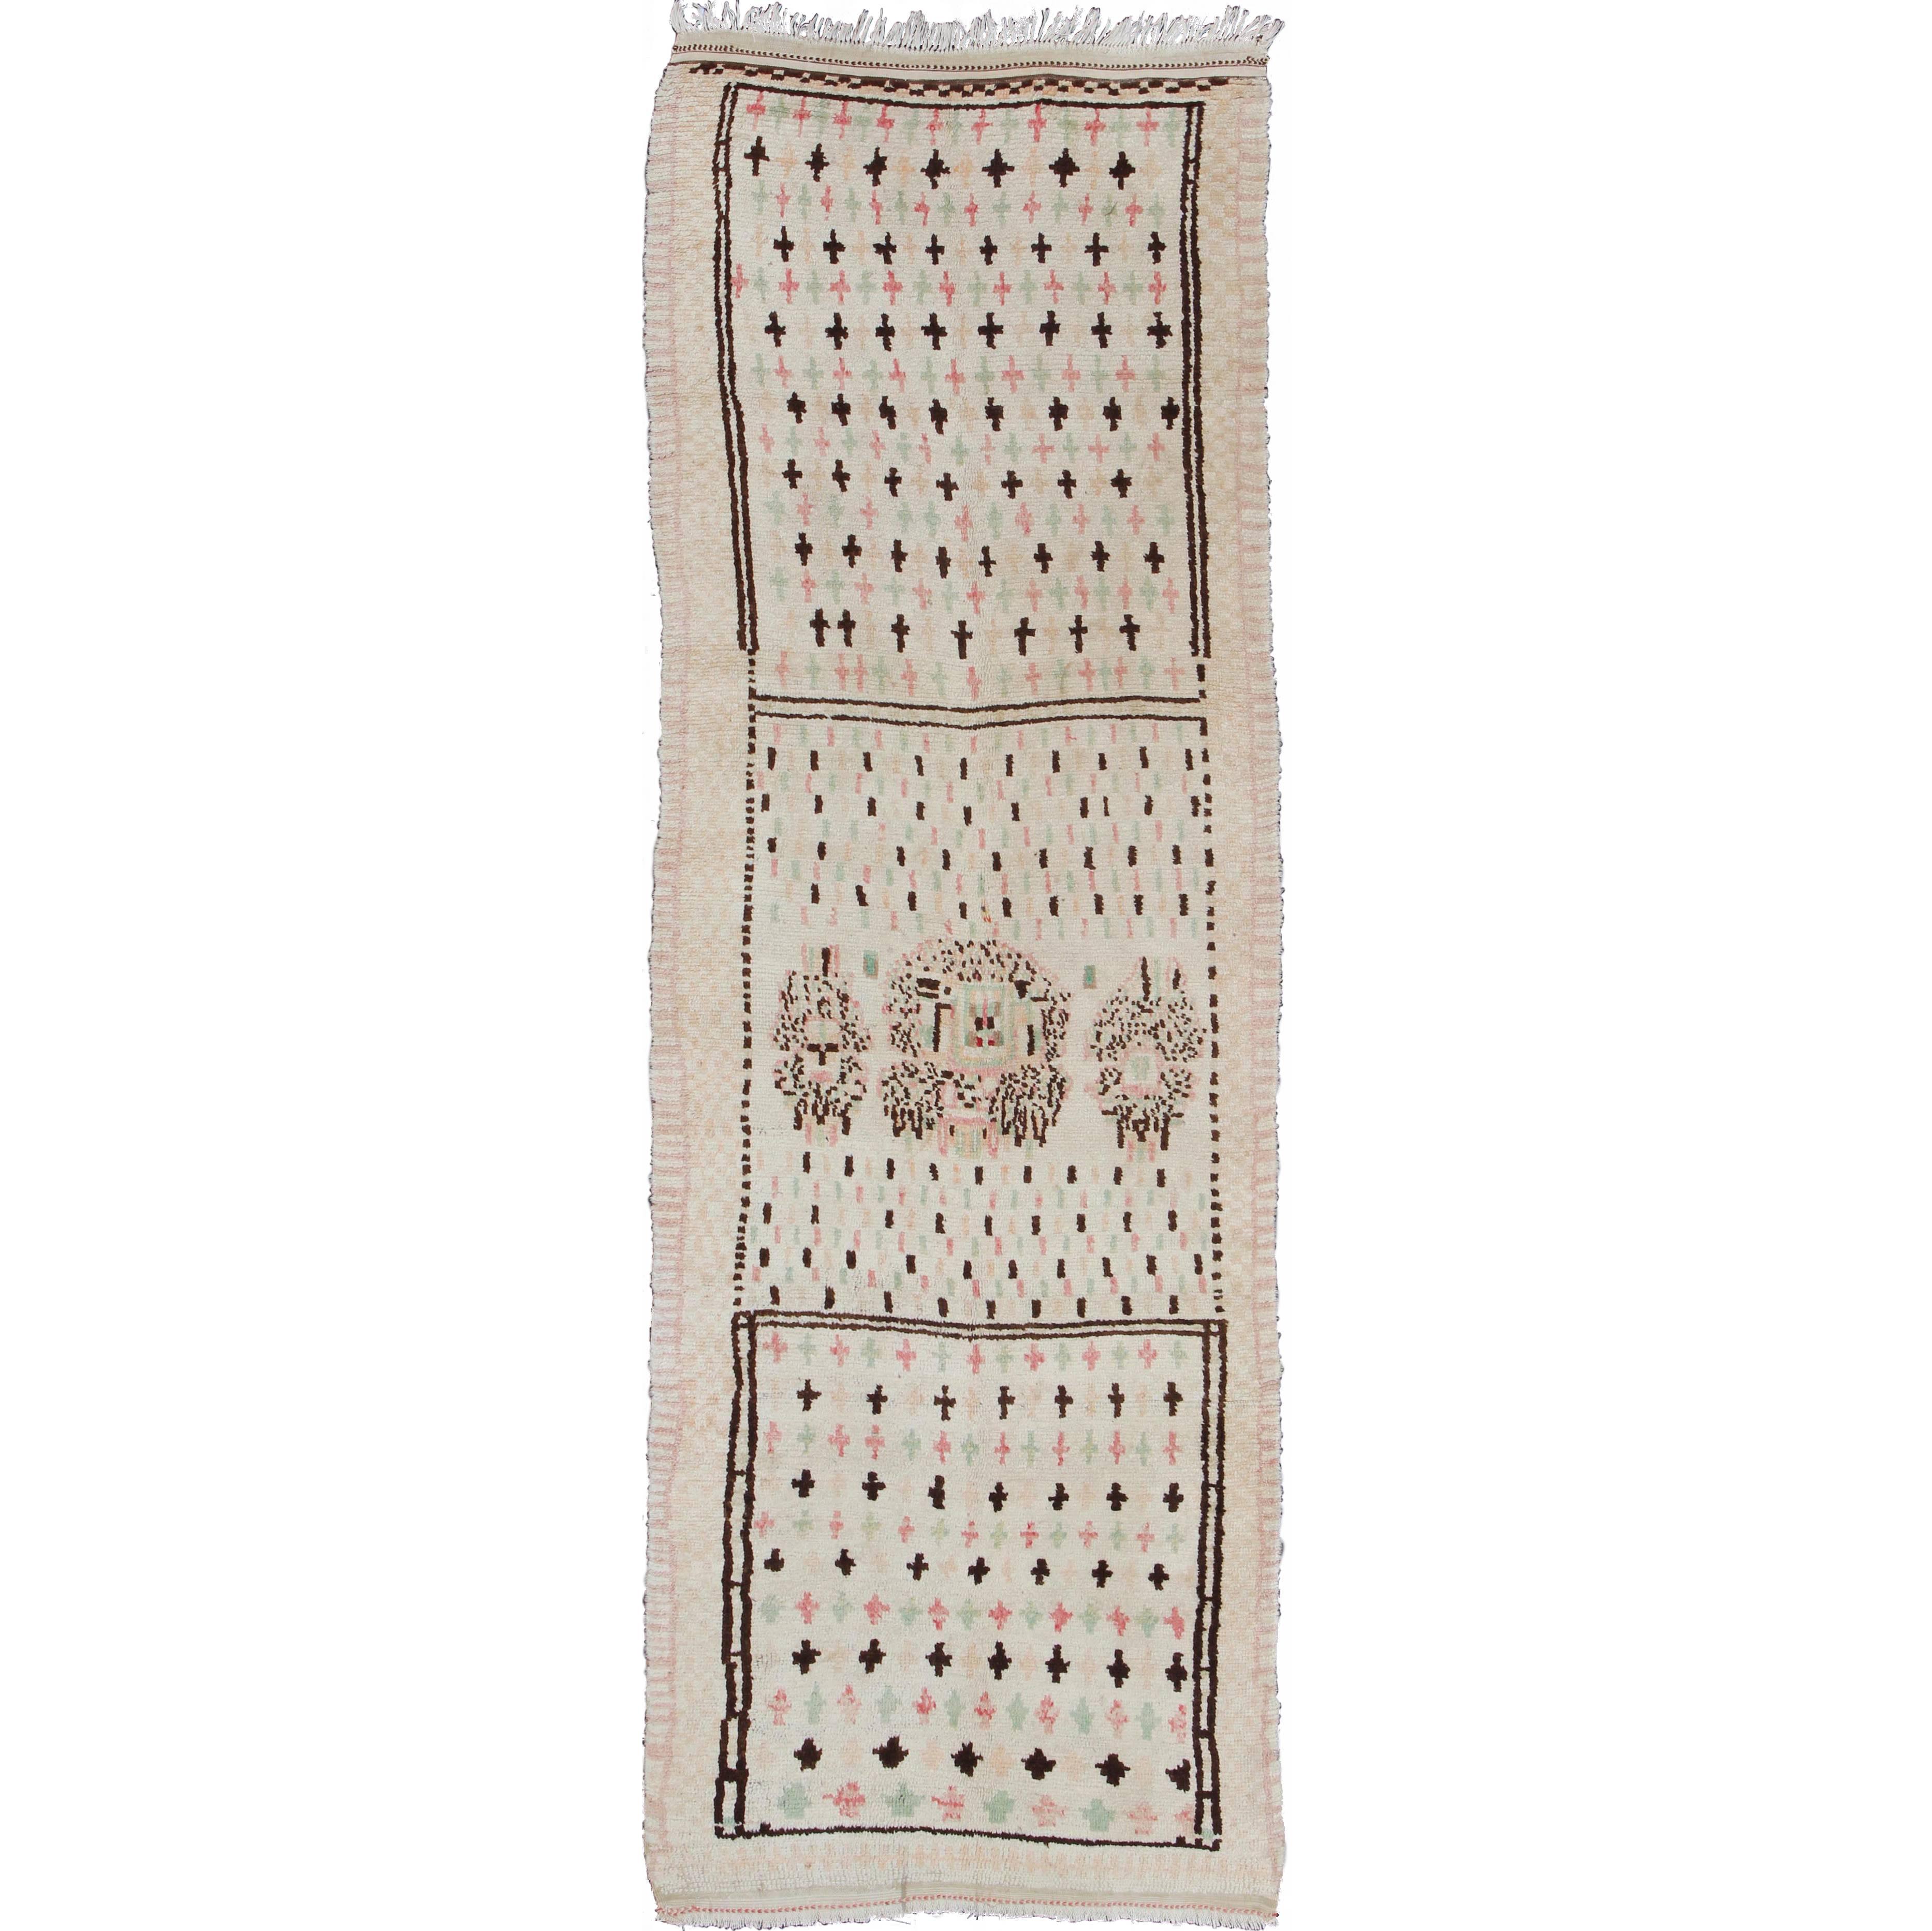 Unique Moroccan Runner in Light Ivory Background & Brown, Rose, Green Accents